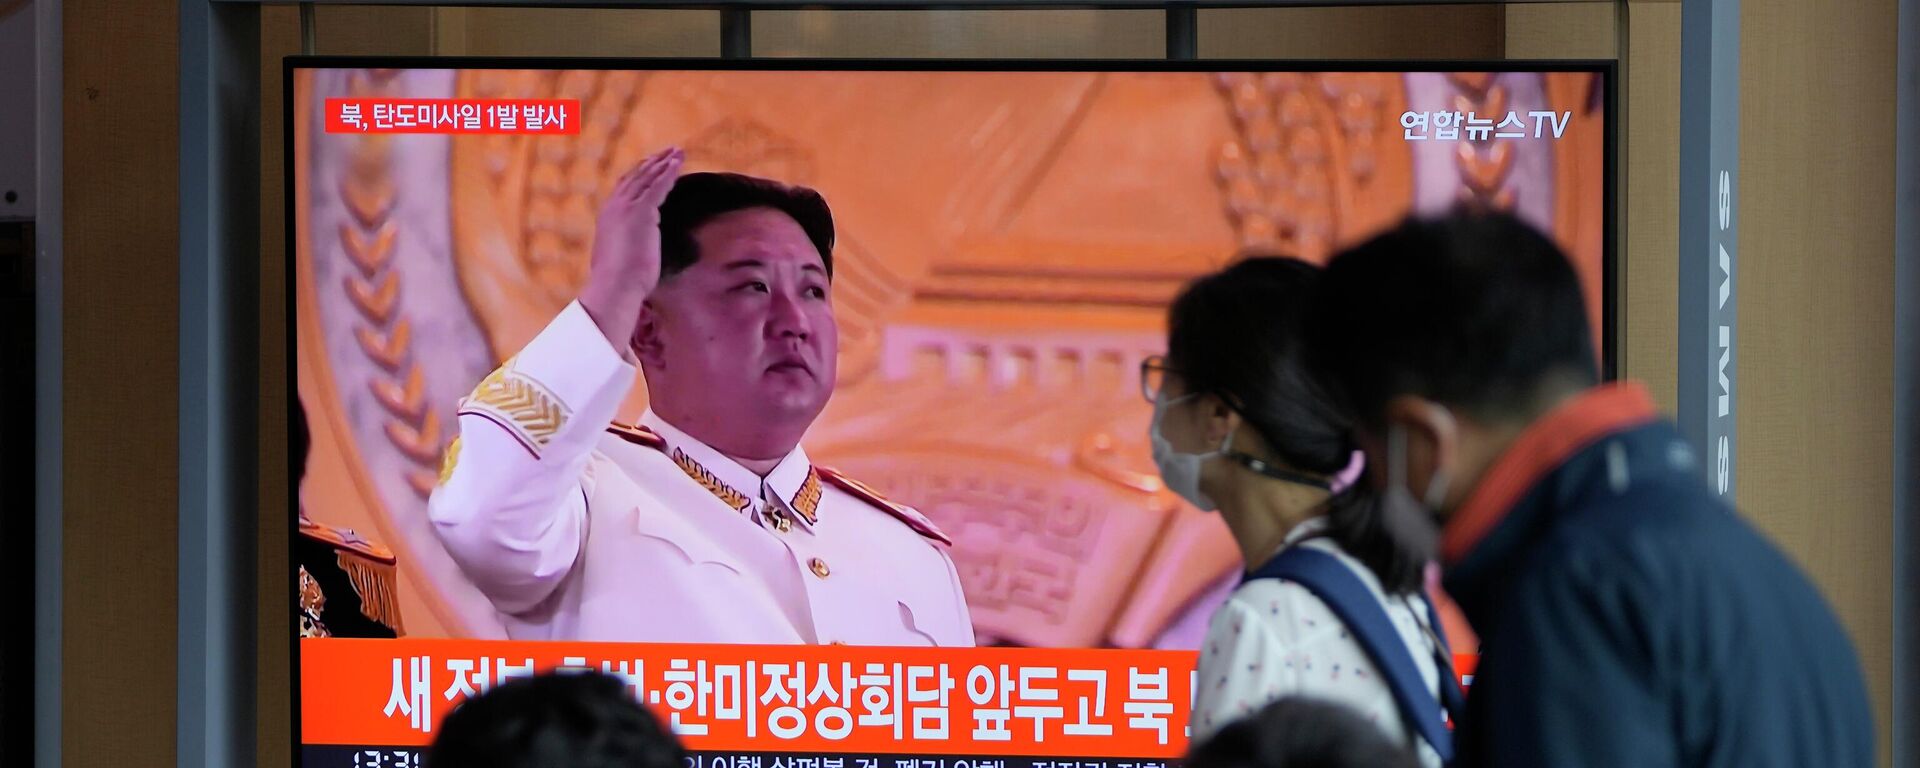 A TV screen showing a news program reporting on North Korea's missile launch with file footage of North Korean leader Kim Jong Un at a train station in Seoul, South Korea, Wednesday, May 4, 2022. - Sputnik International, 1920, 10.10.2022